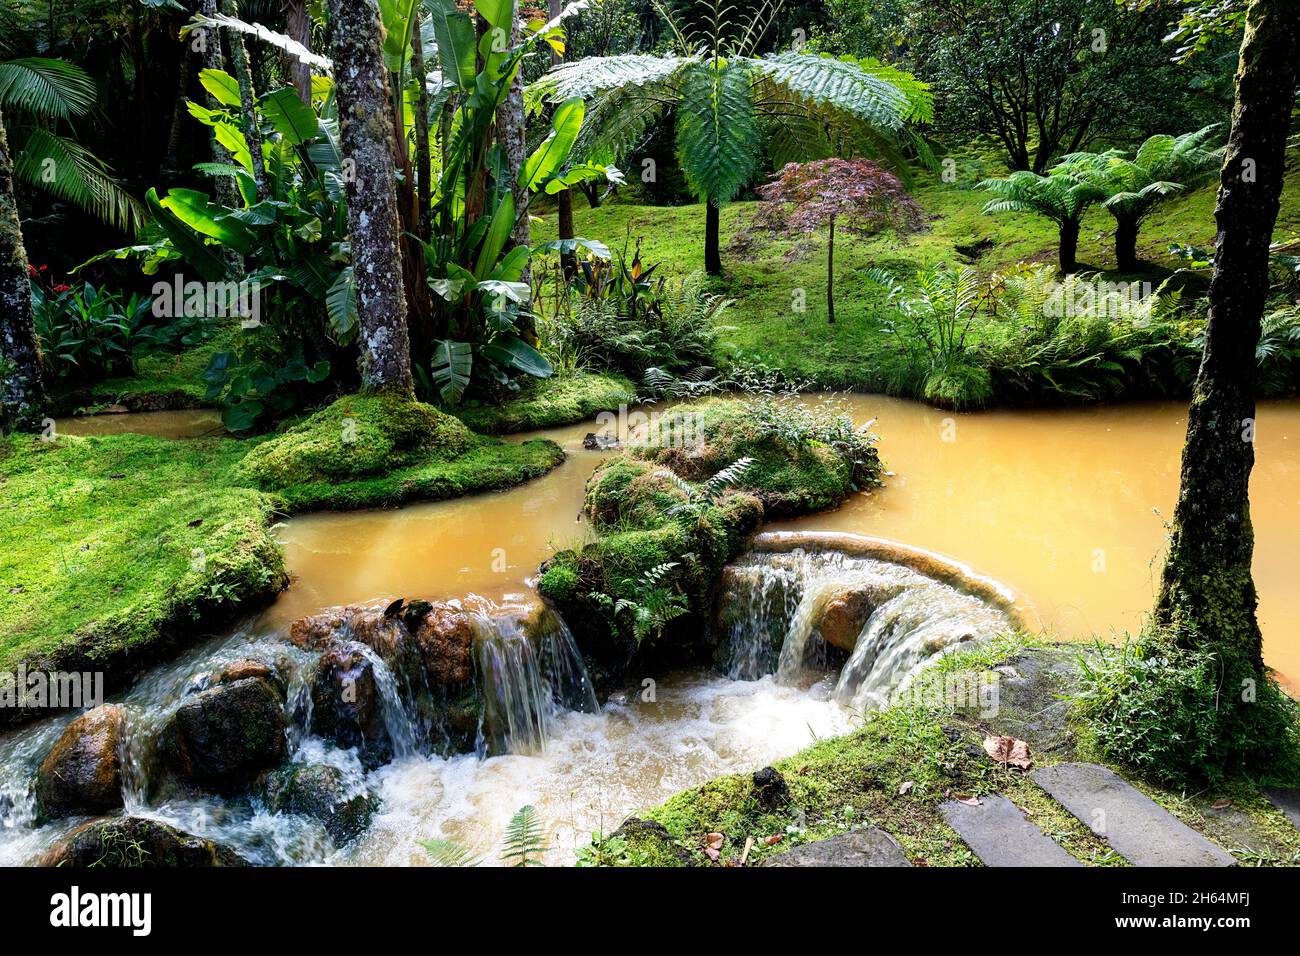 Portugal, Azores, Sao Miguel Island, Furnas. Lush exotic forest and water stream in Terra Nostra Garden Stock Photo